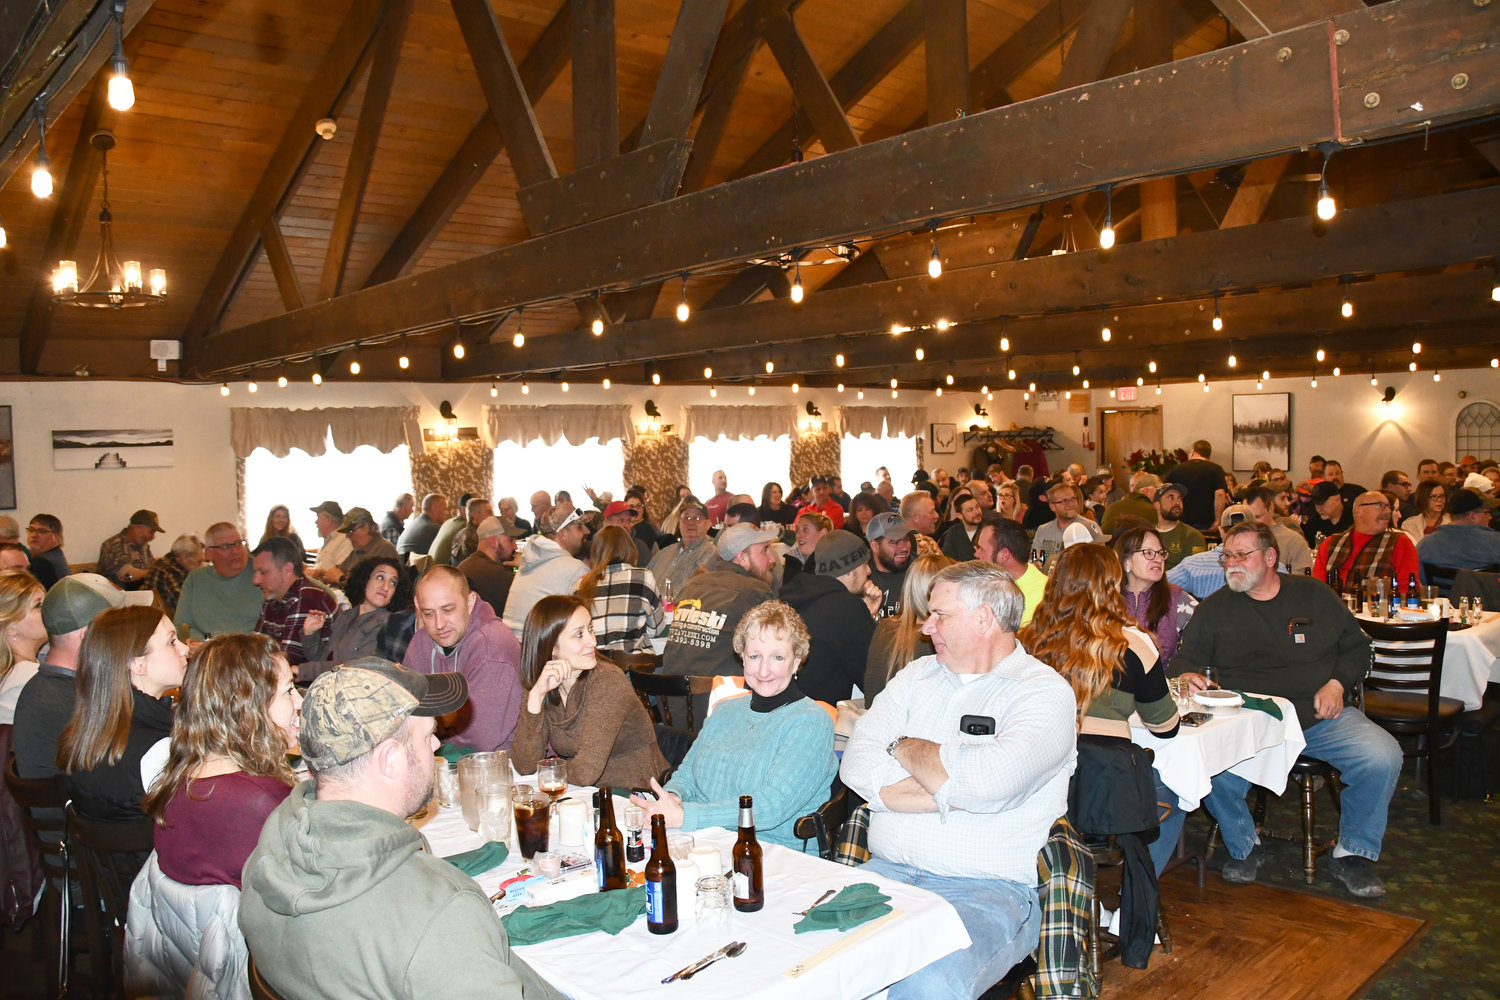 The Rockland House’s main dining room was filled to capacity as nearly 200 people attended the fundraiser.